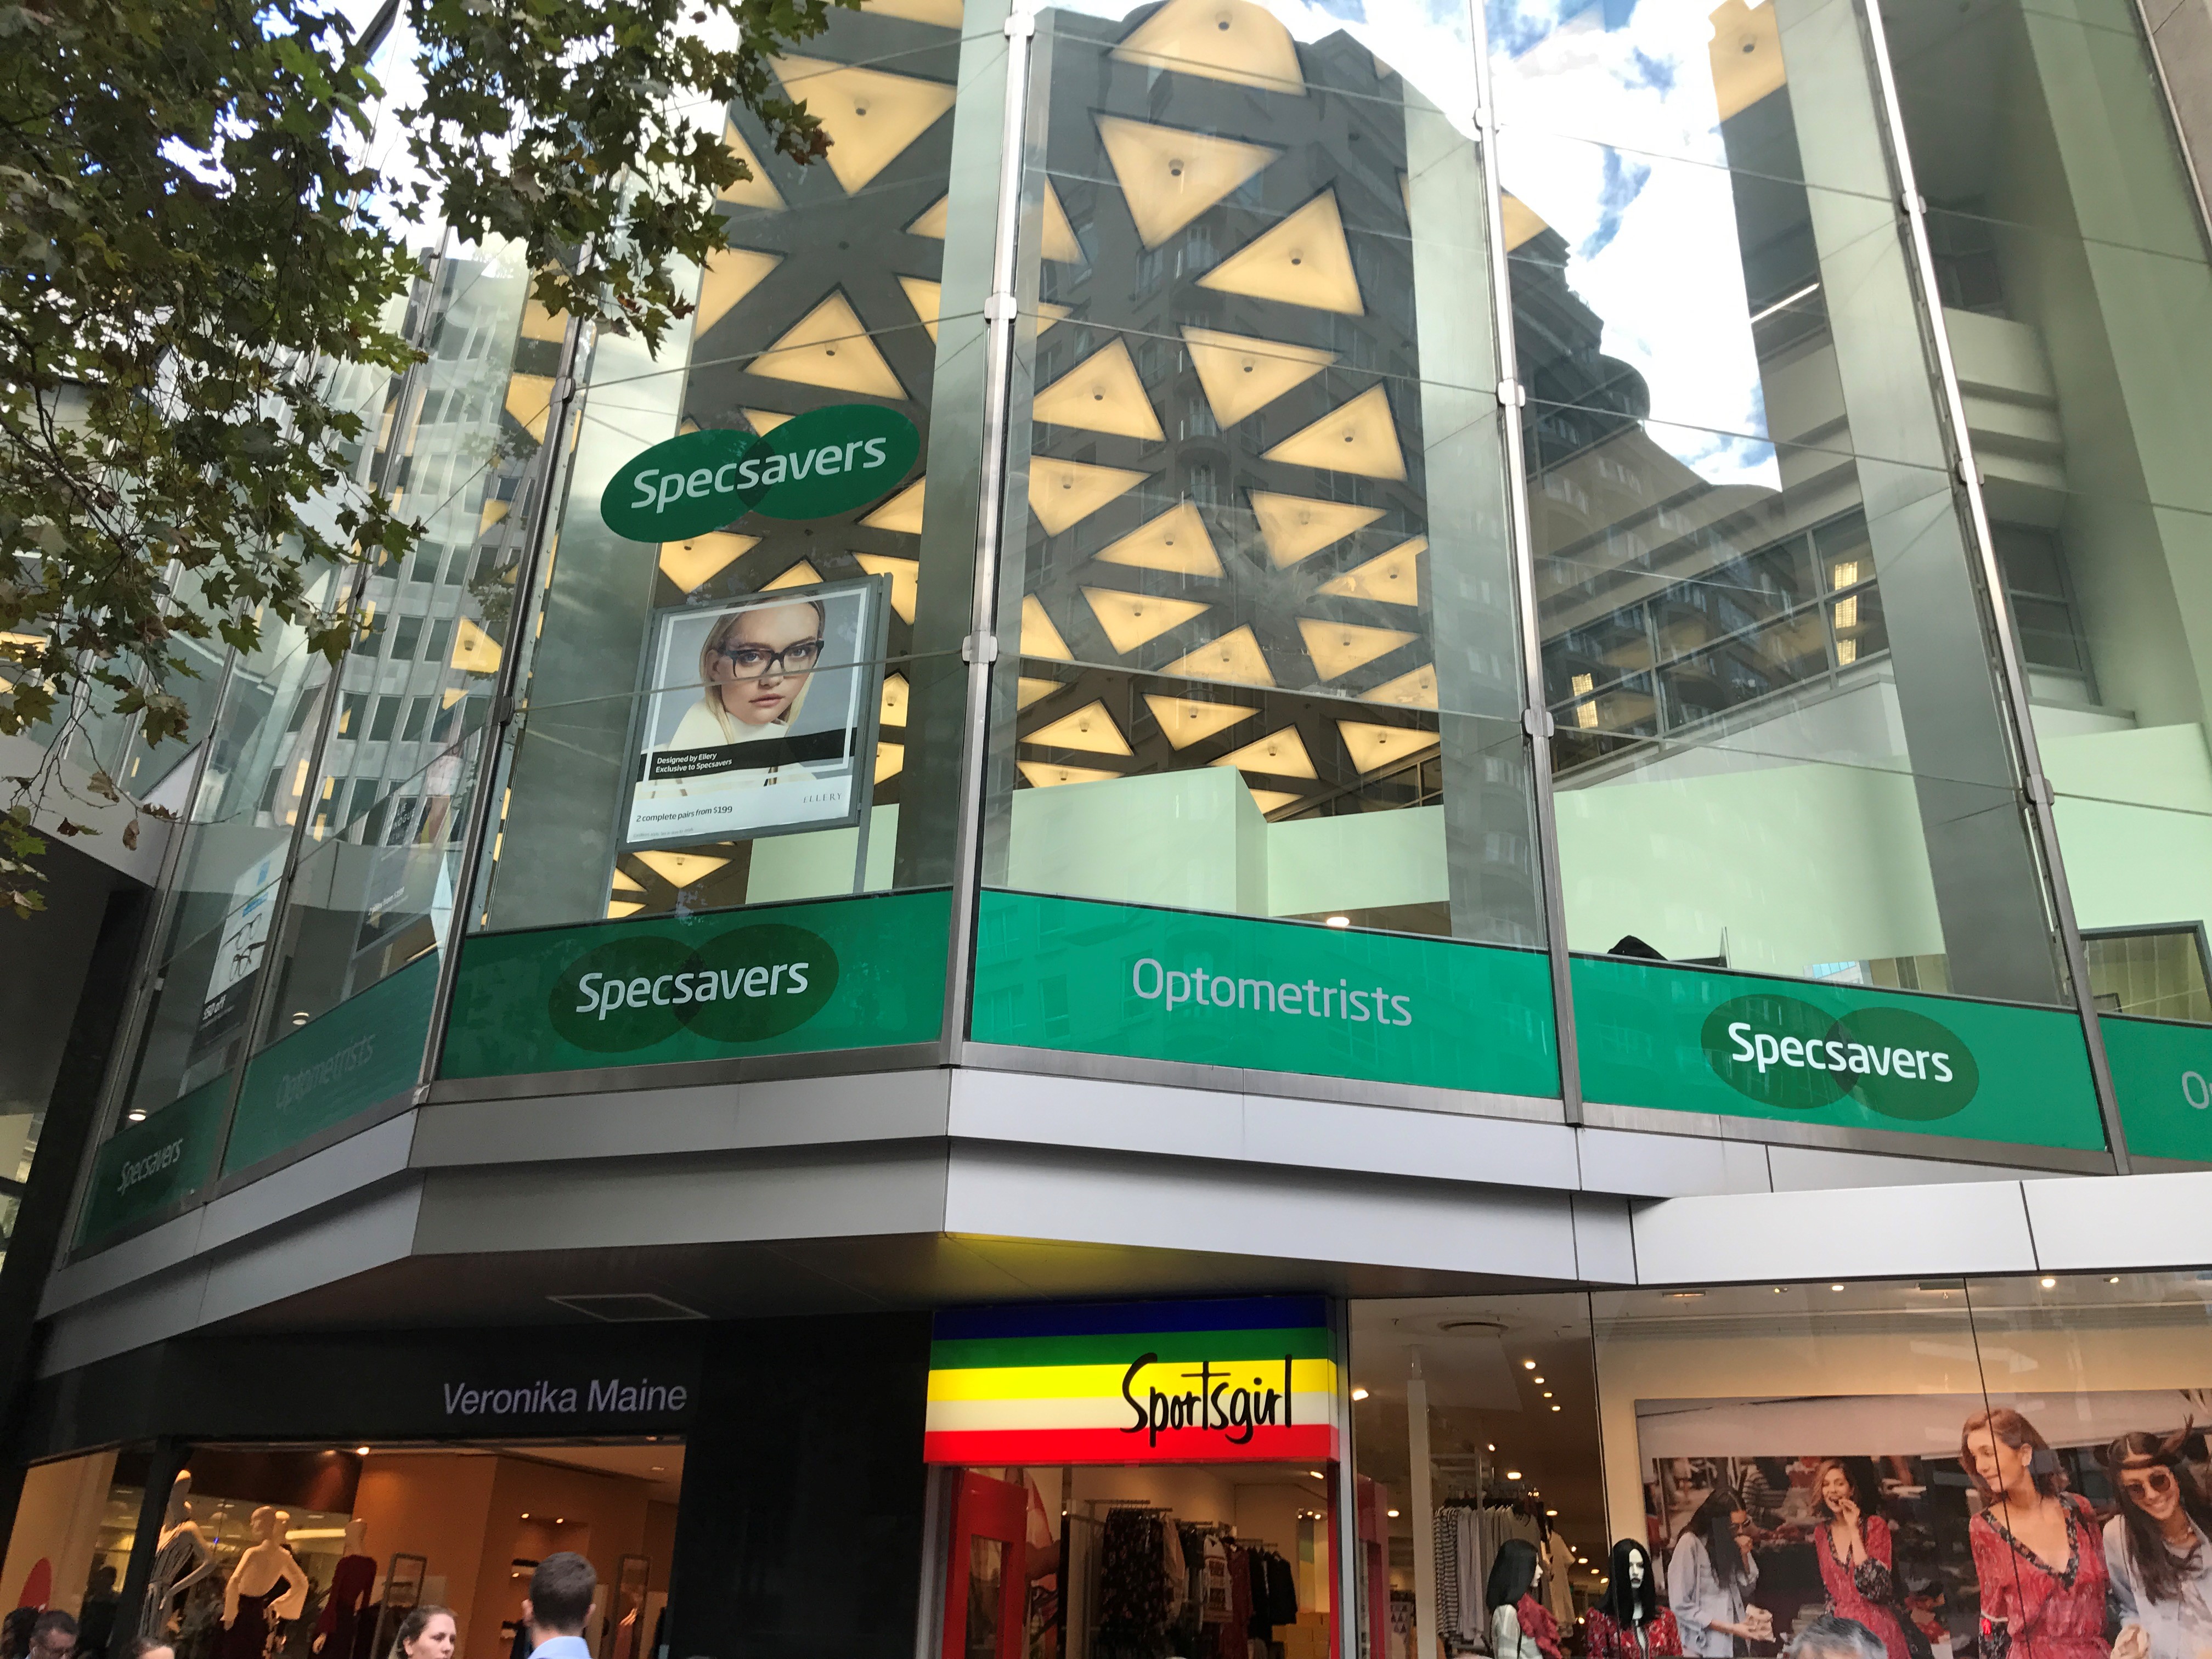 Images Specsavers Optometrists - Sydney - MetCentre